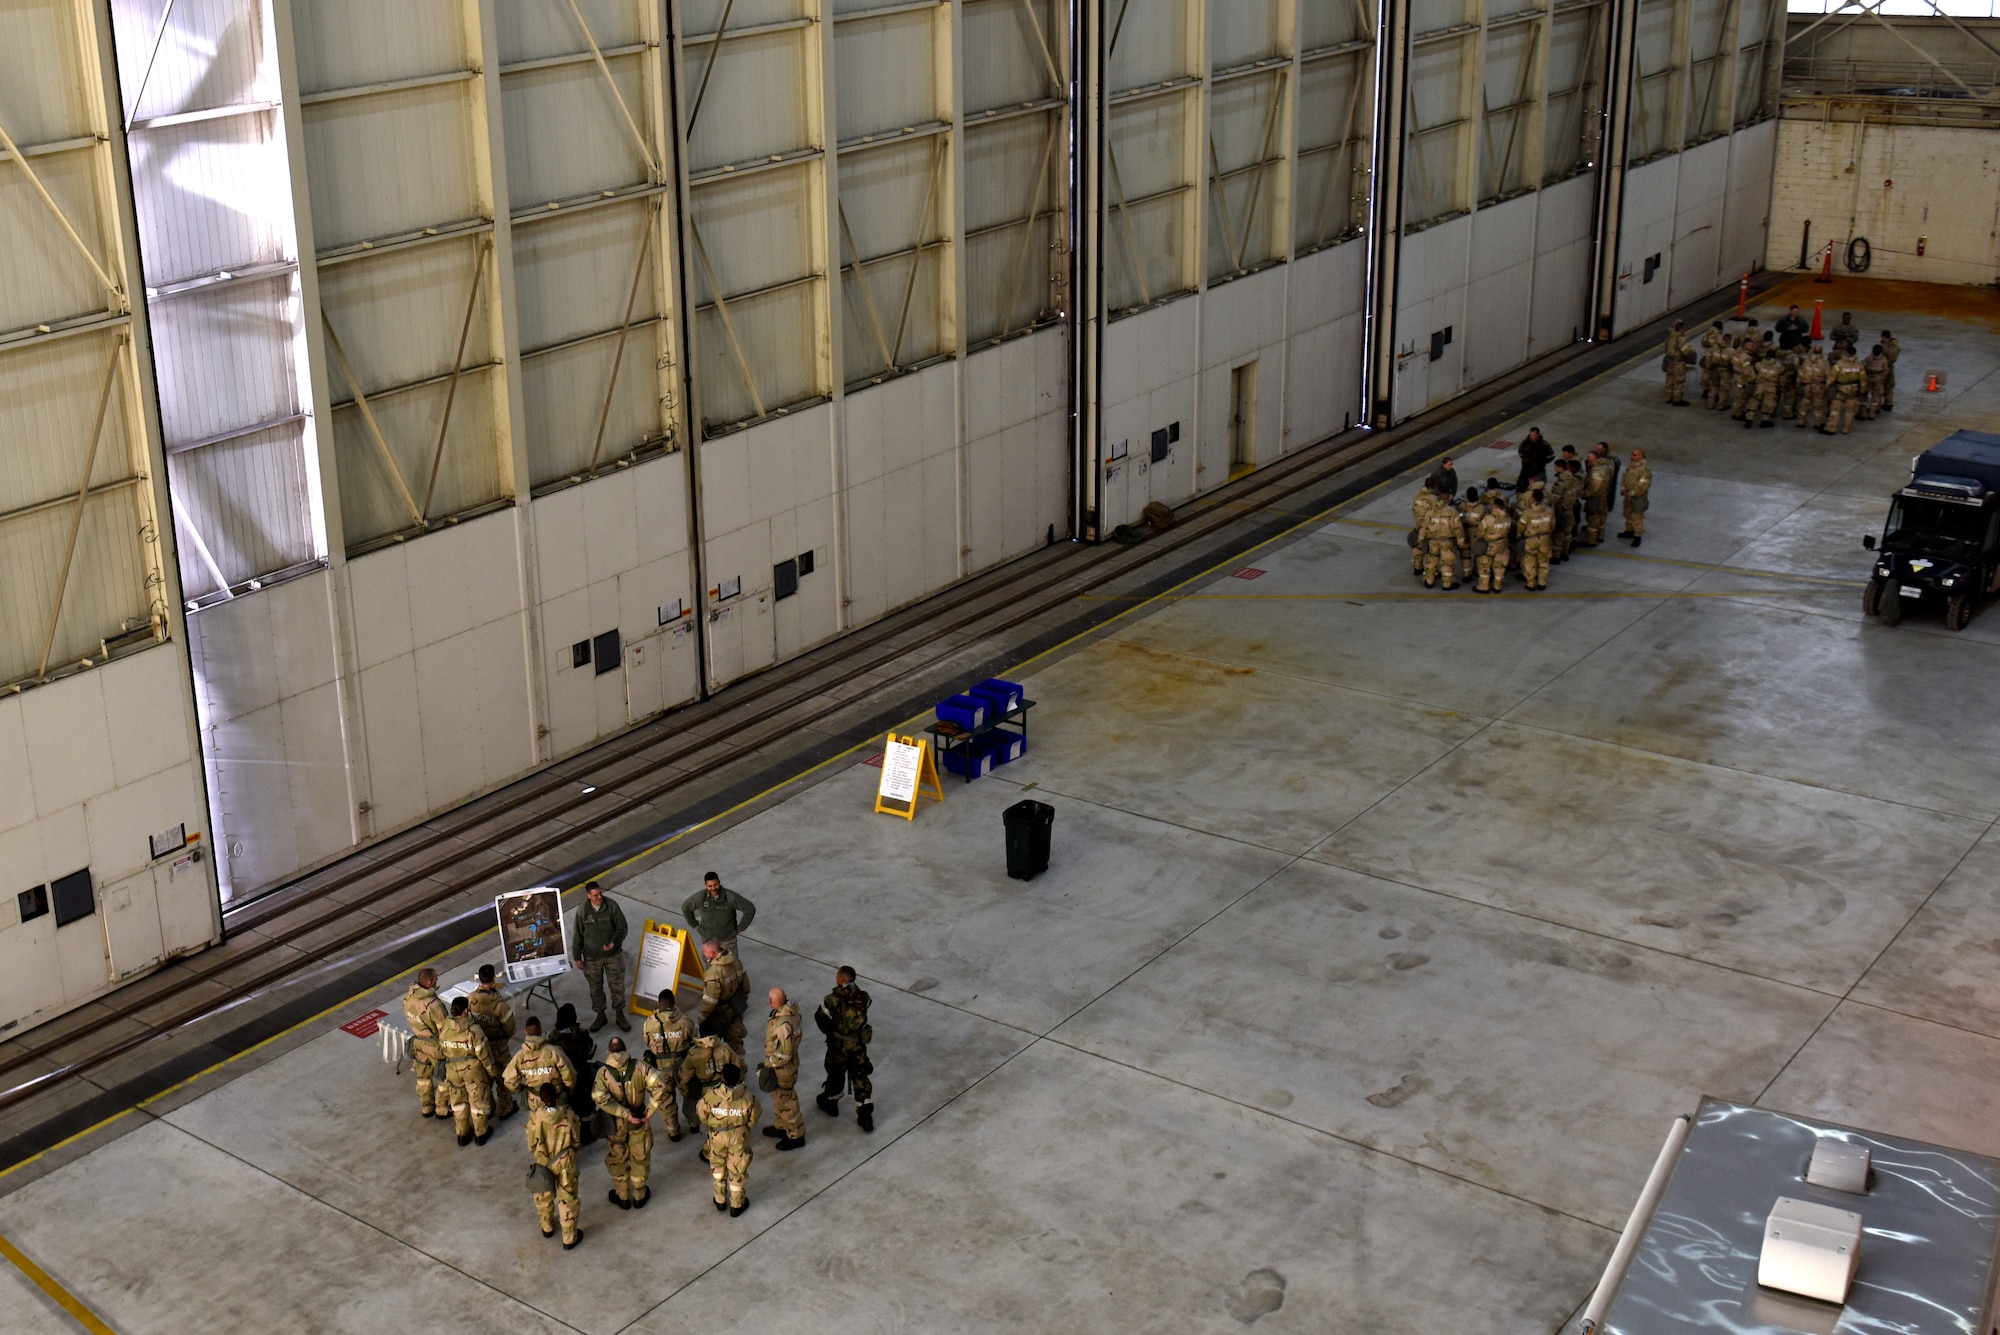 Members of the North Carolina Air National Guard participate in an Ability To Survive and Operate (ATSO) training held in a C-17 Globemaster III hangar at the North Carolina Air National Guard (NCANG) Base, Charlotte Douglas International Airport, Jan. 10, 2019. The ATSO exercise consists of ten rotating stations and serves as refresher training for situations like self-aid buddy care, explosive ordinance device recognition, and chemical warfare decontamination stations.